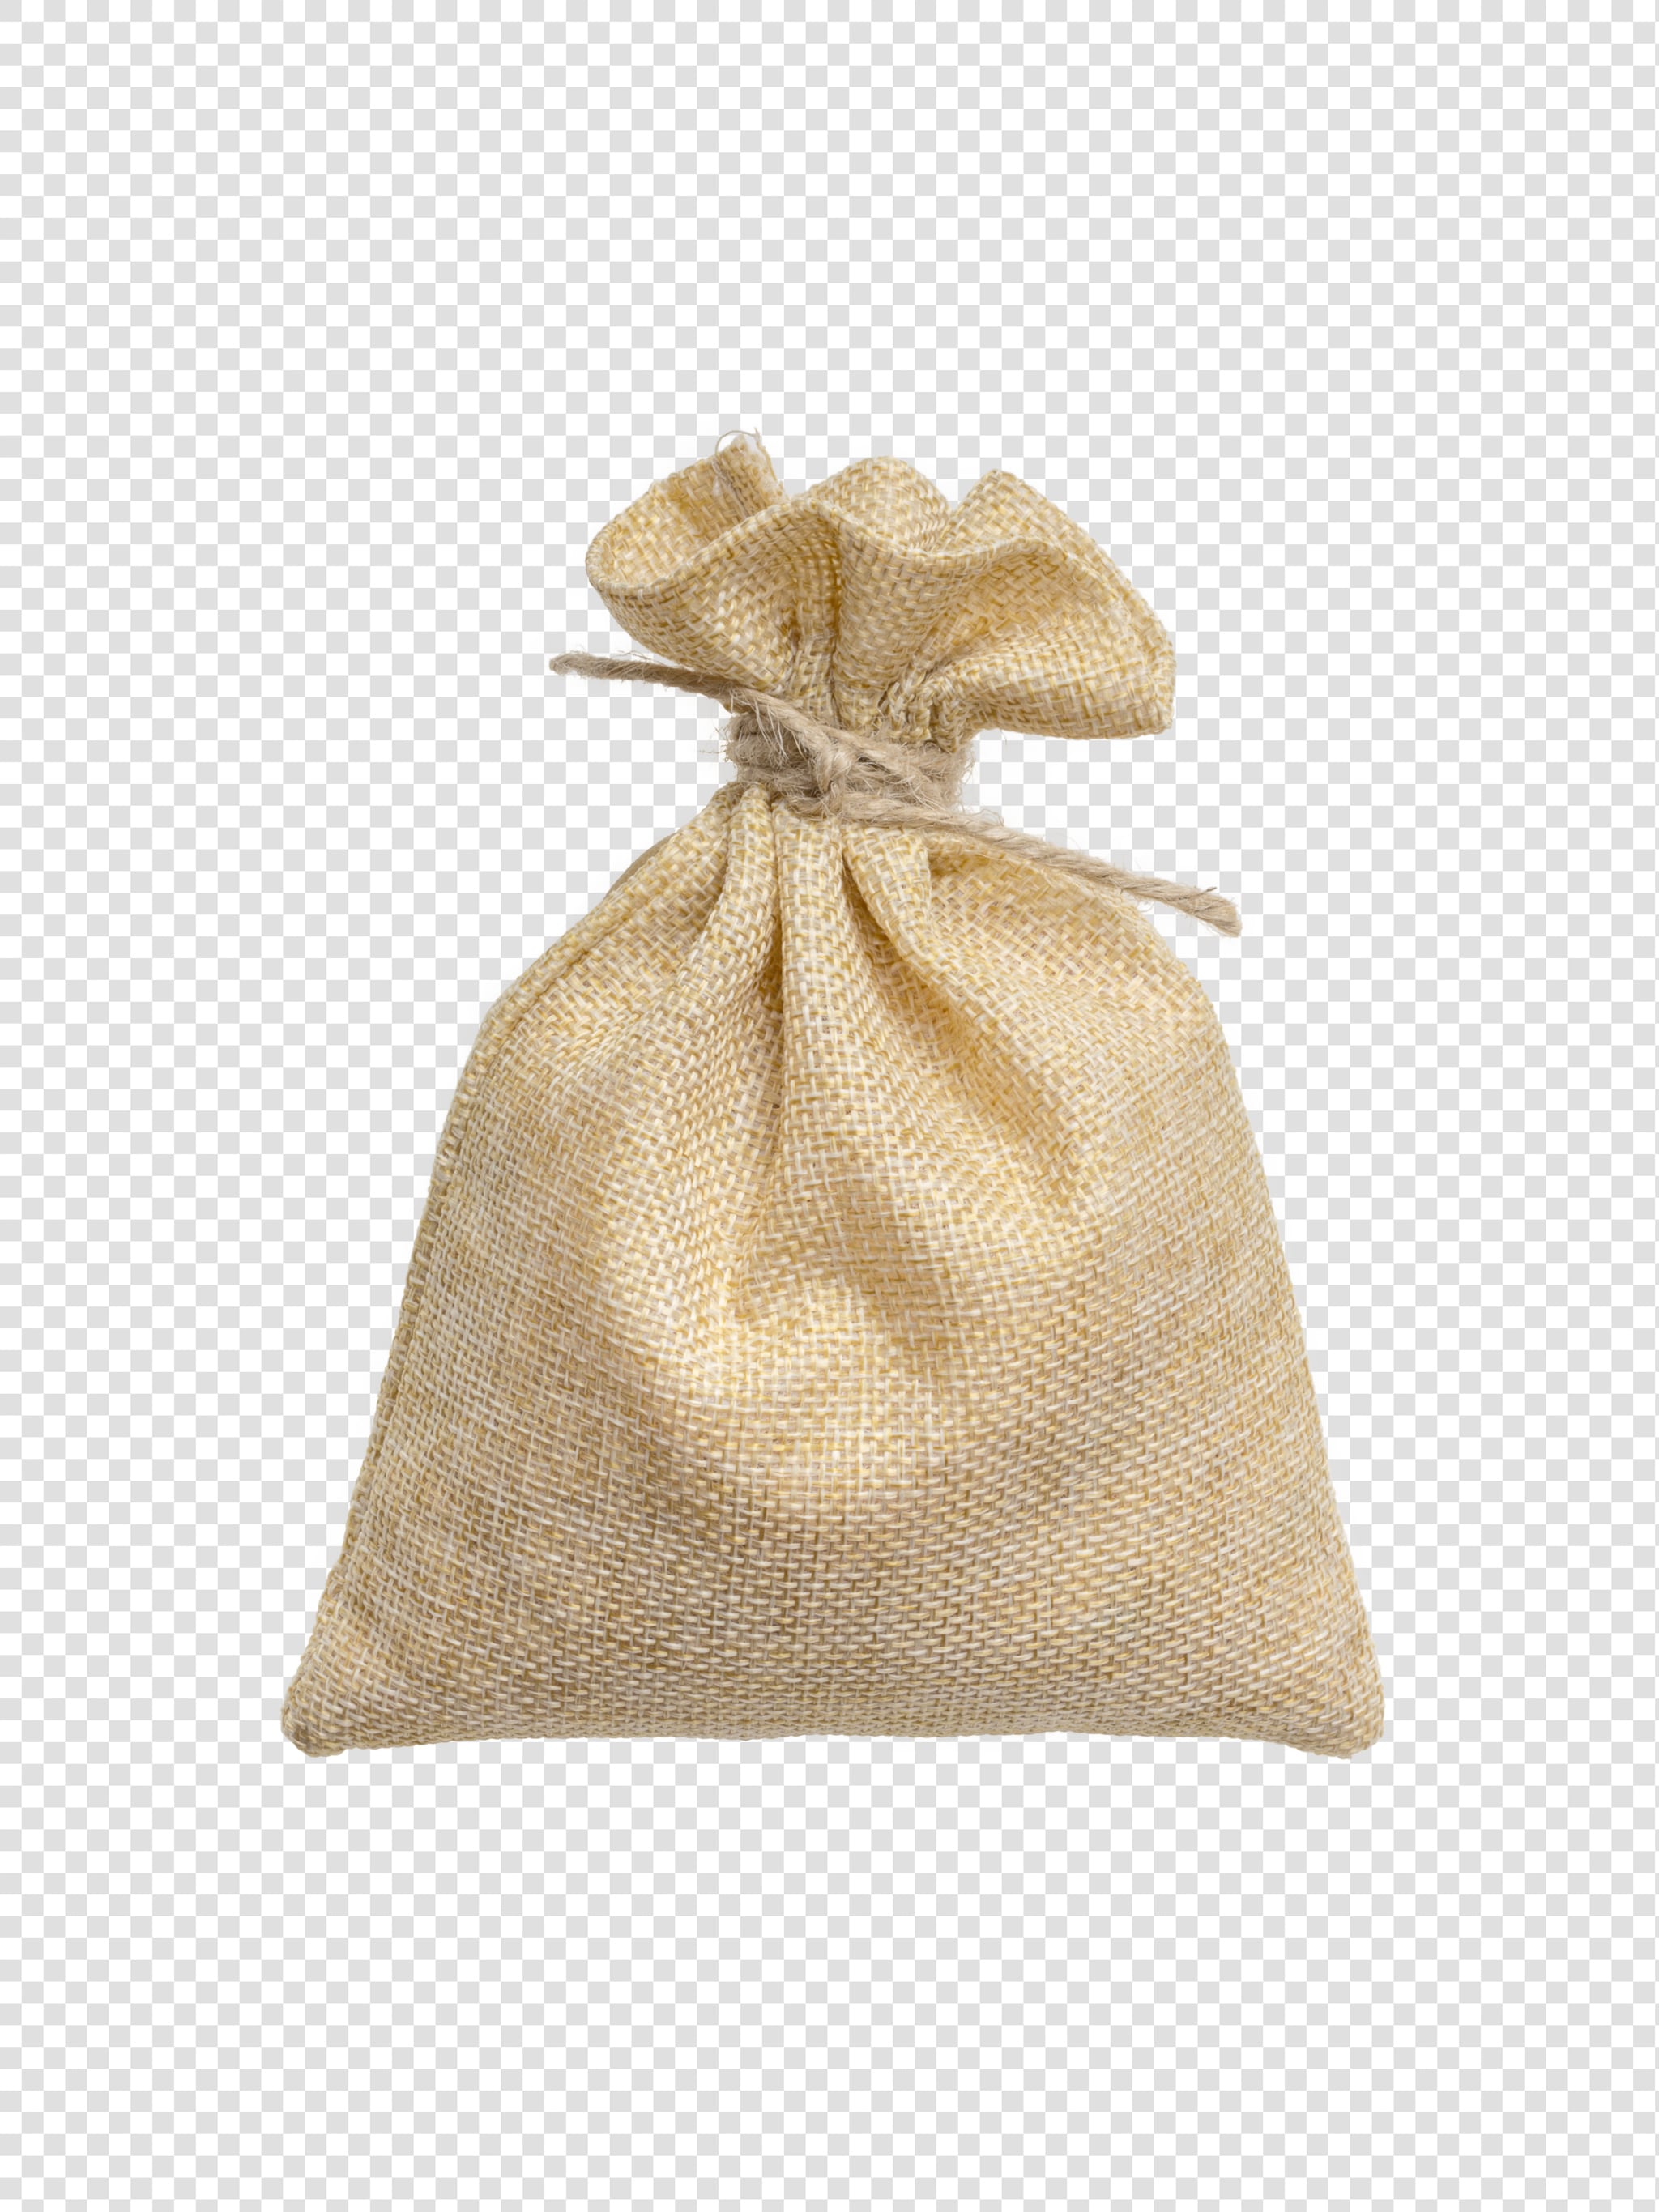 Clean Isolated PSD image of Craft pouch on transparent background with separated shadow